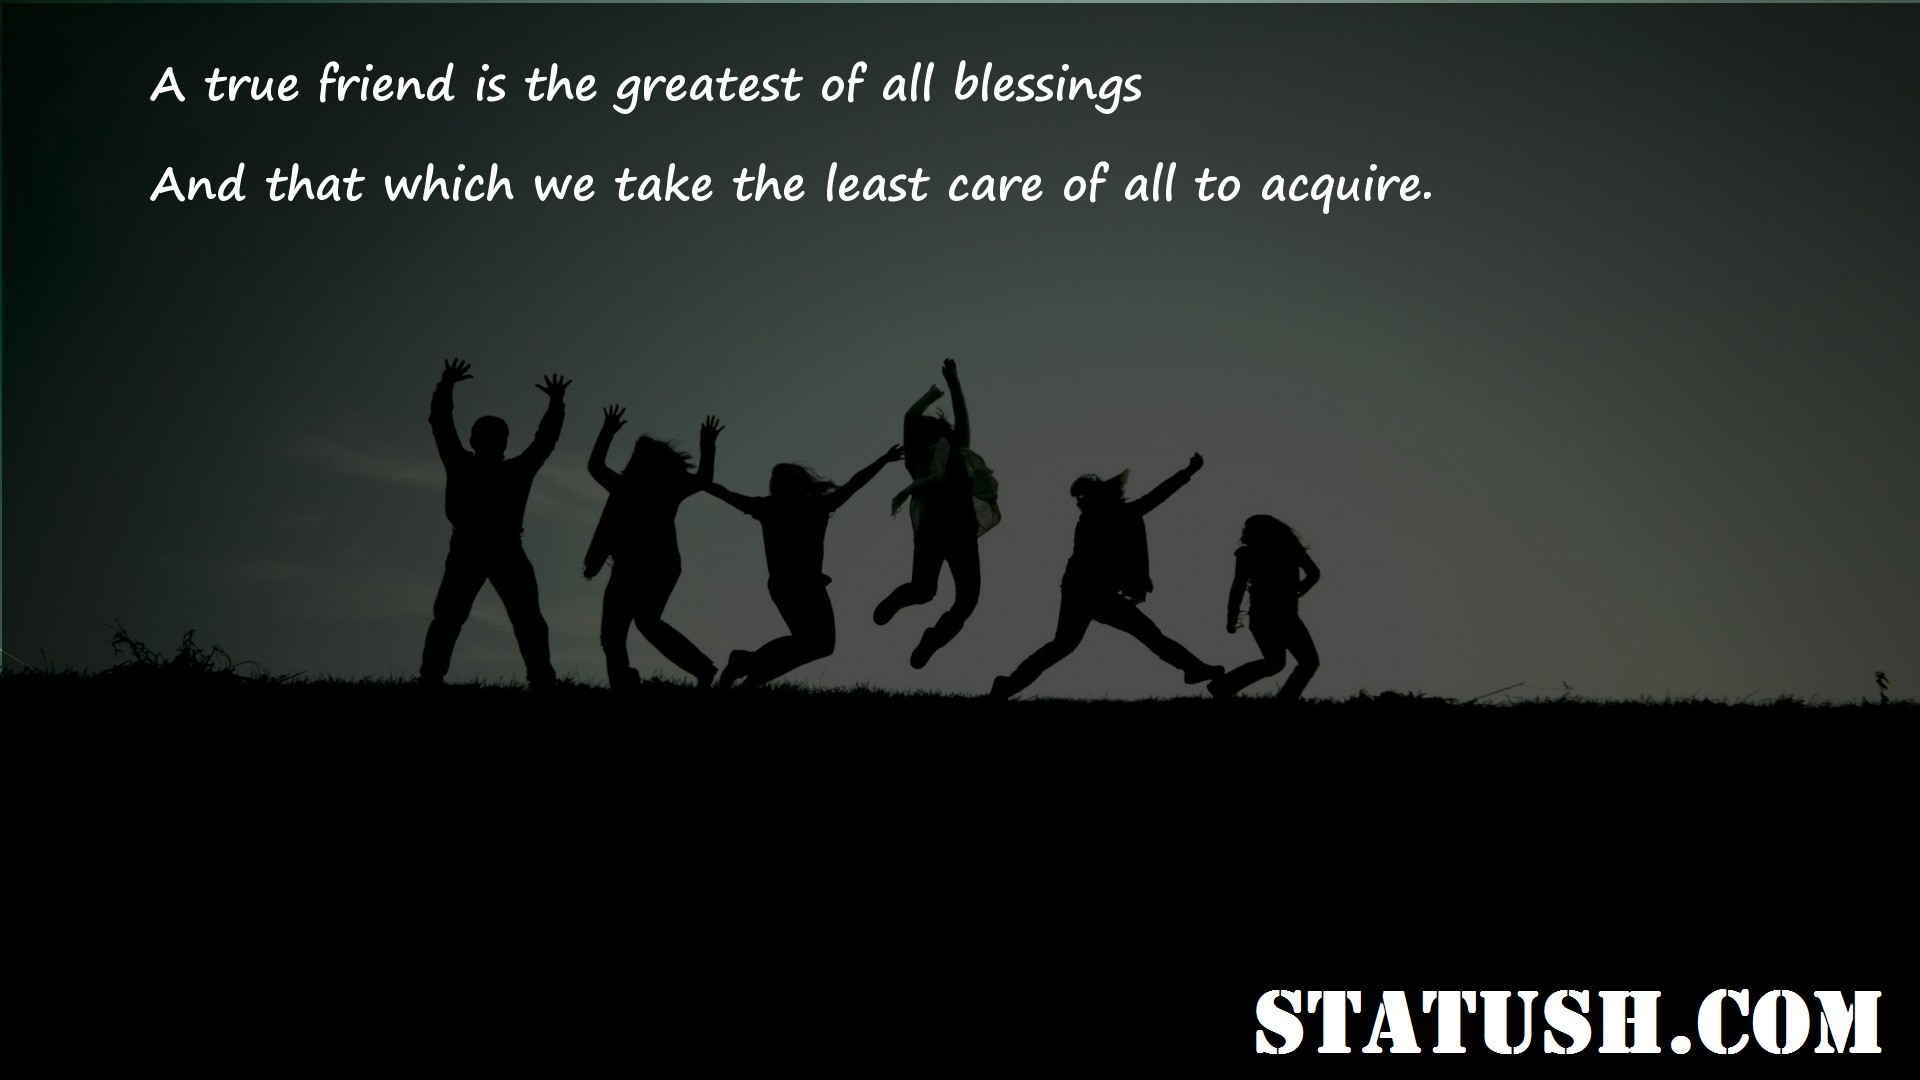 A true friend is the greatest of all blessings - Friendship Quotes at statush.com